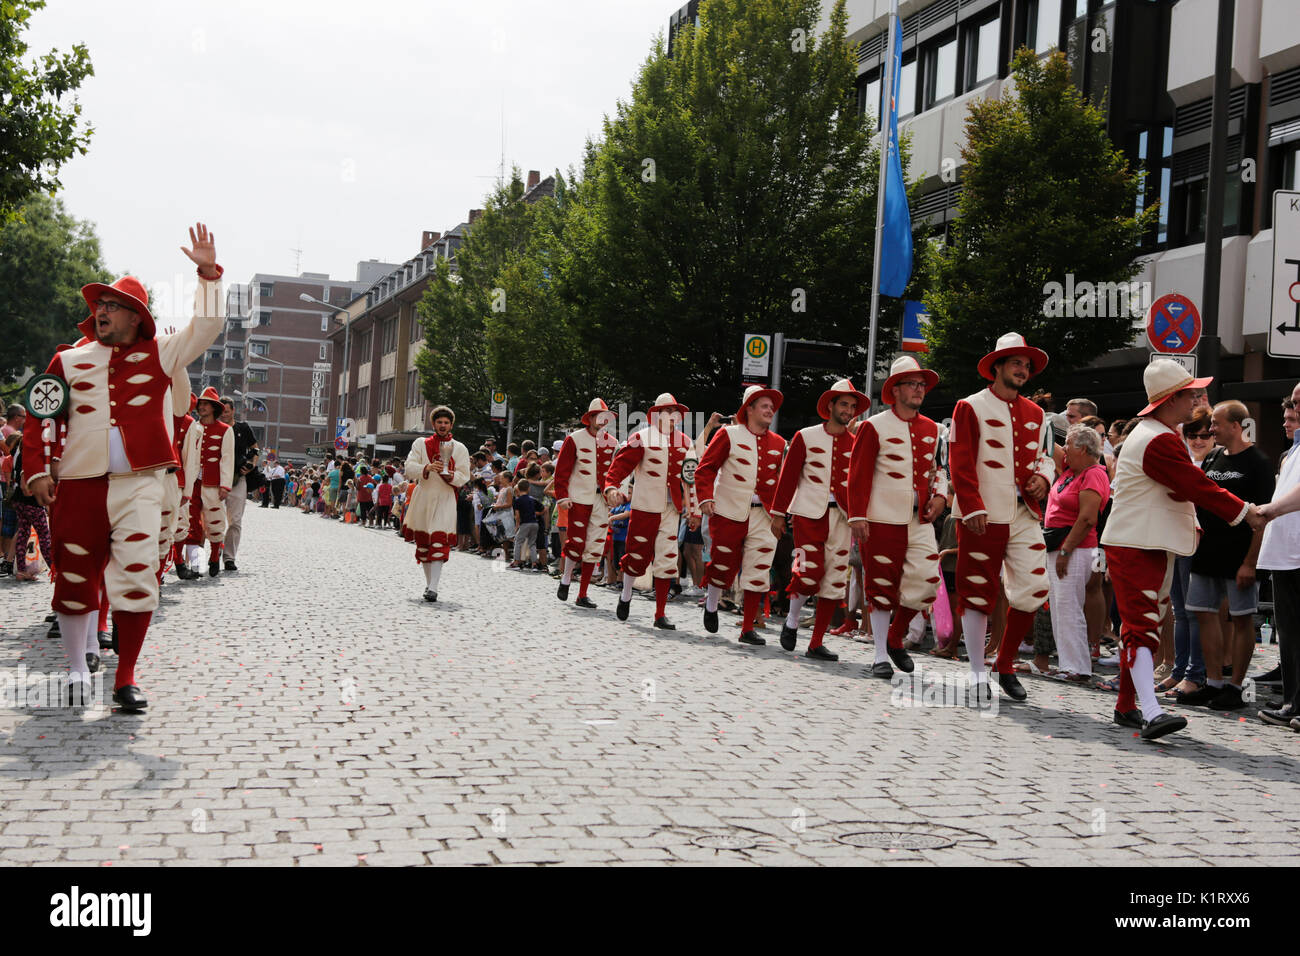 Worms, Germany. 27th August 2017. The journeymen march in the parade. The first highlight of the 2017 Backfischfest was the big parade through the city of Worms with over 80 groups and floats. Community groups, music groups and business from Worms and further afield took part. Credit: Michael Debets/Alamy Live News Stock Photo